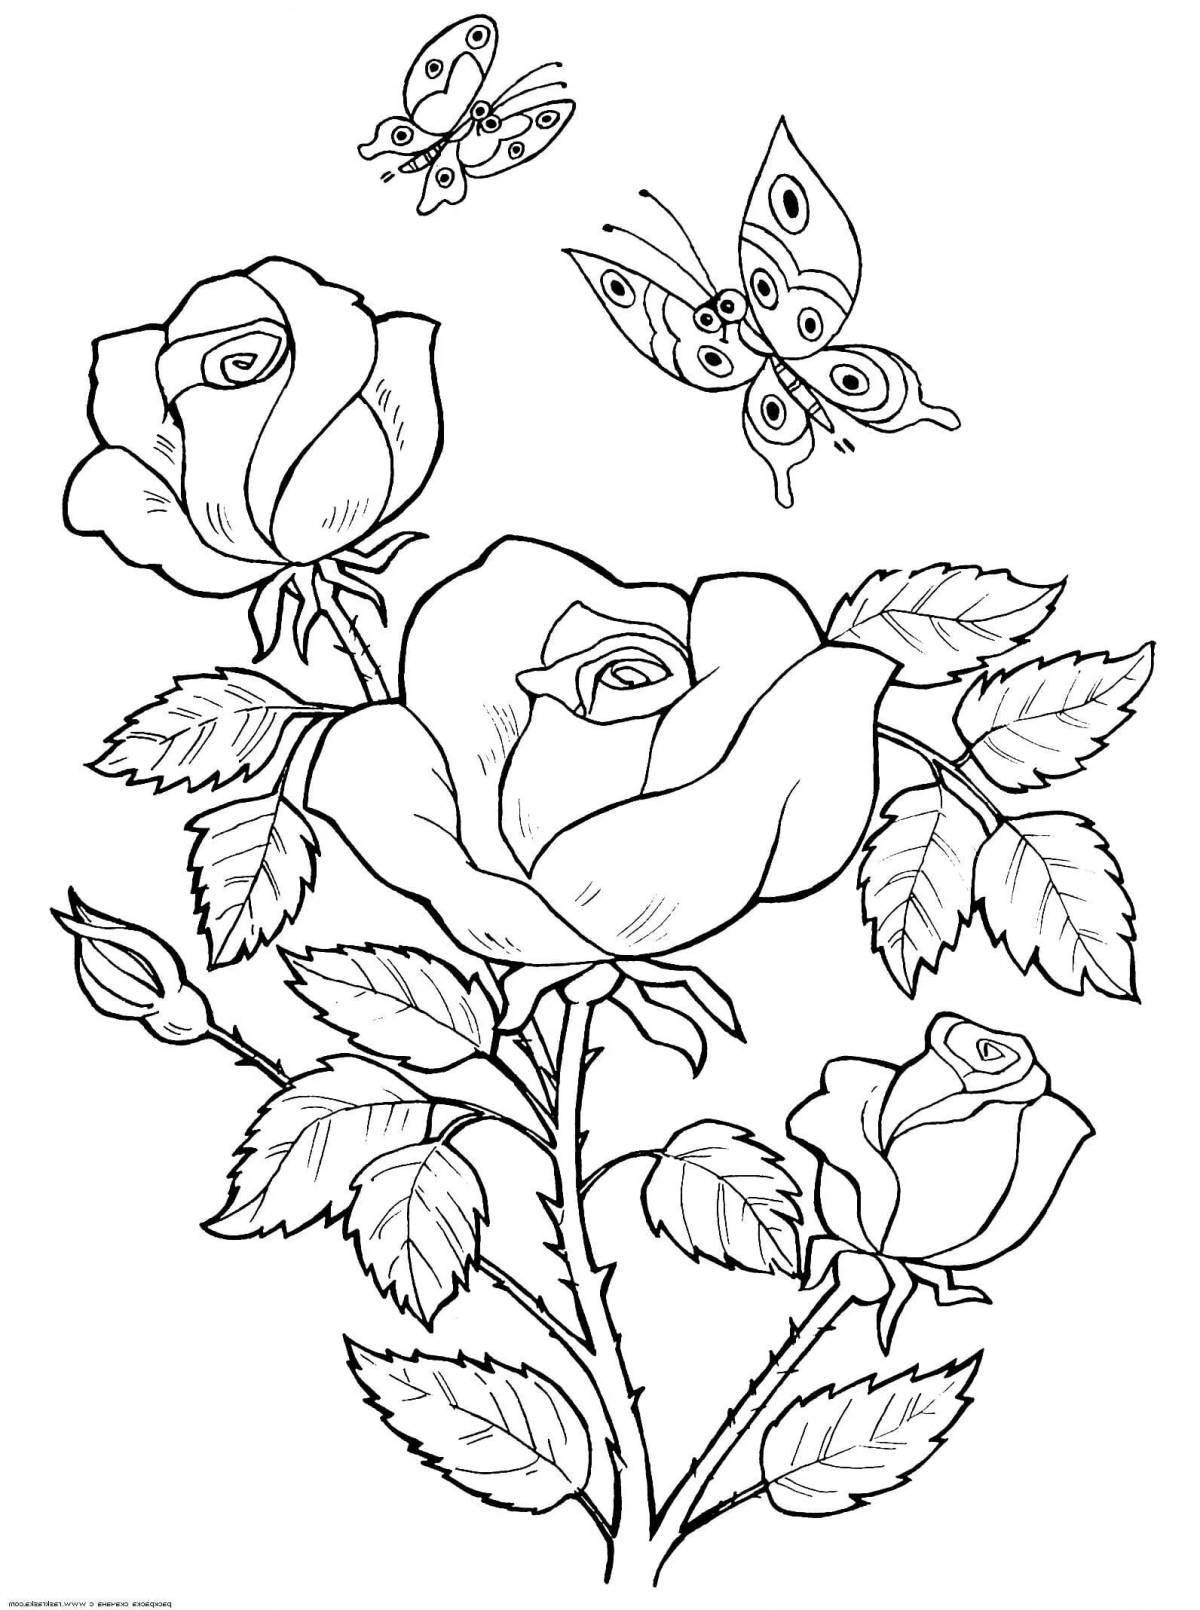 Glorious beauty coloring page